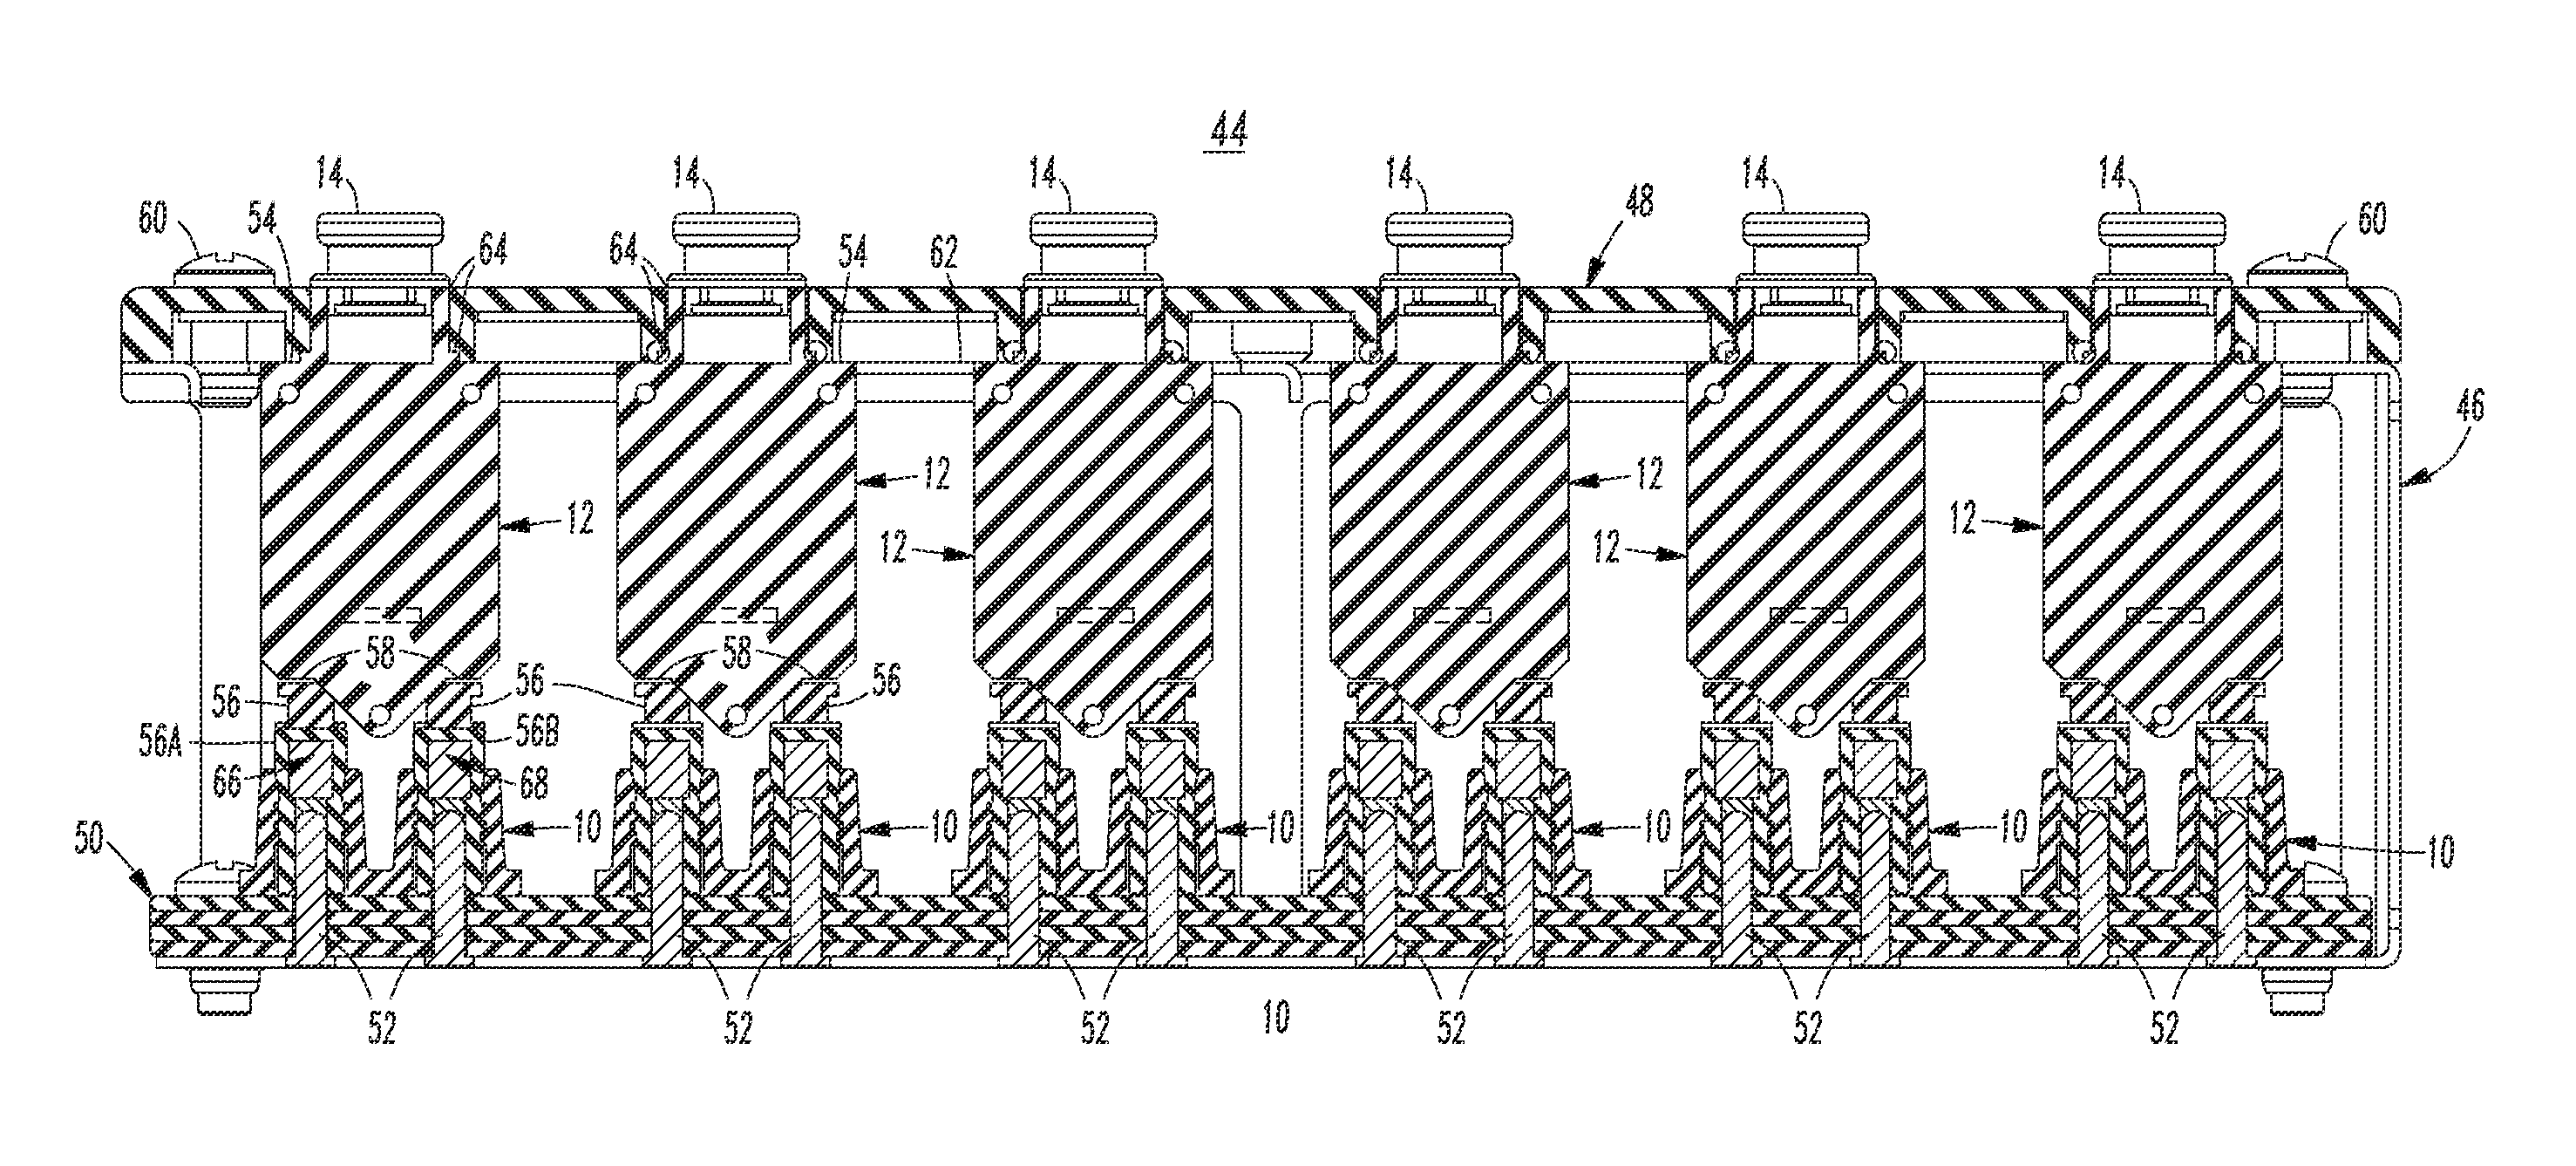 Plug-in circuit breaker assembly including insulative retainers